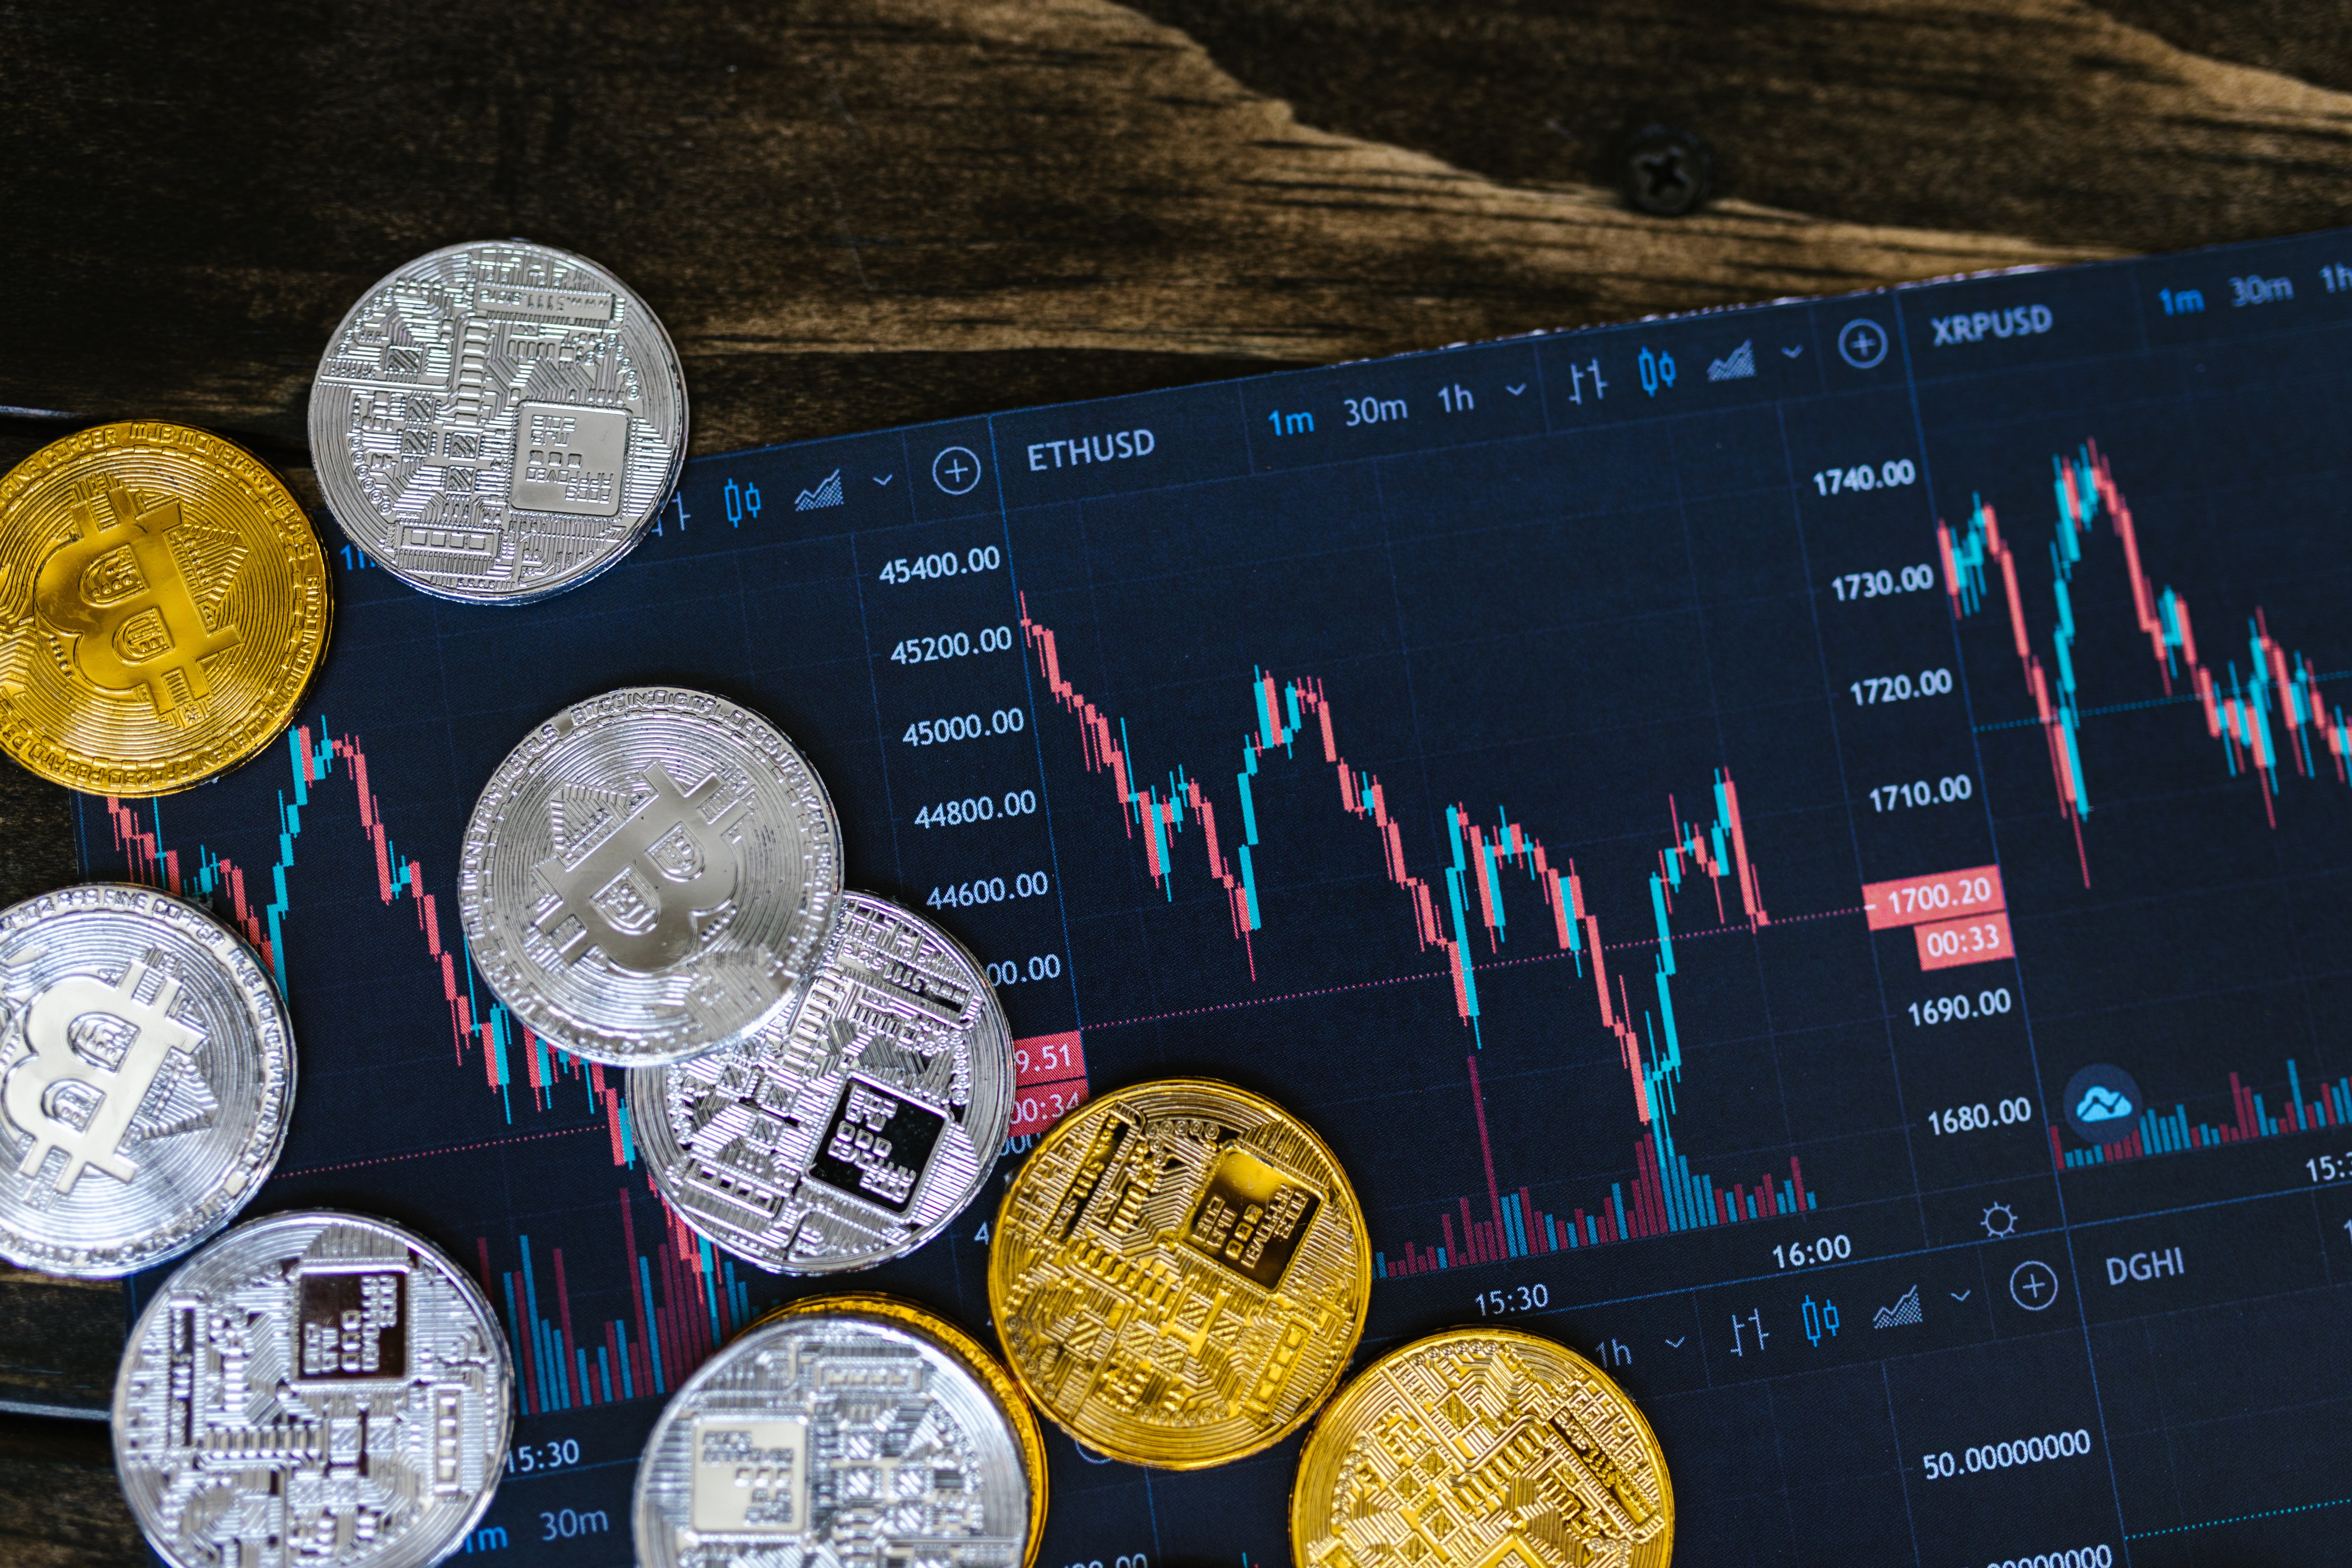 Cryptocurrencies Selloff news: Why has Bitcoin price dropped below $40,000?